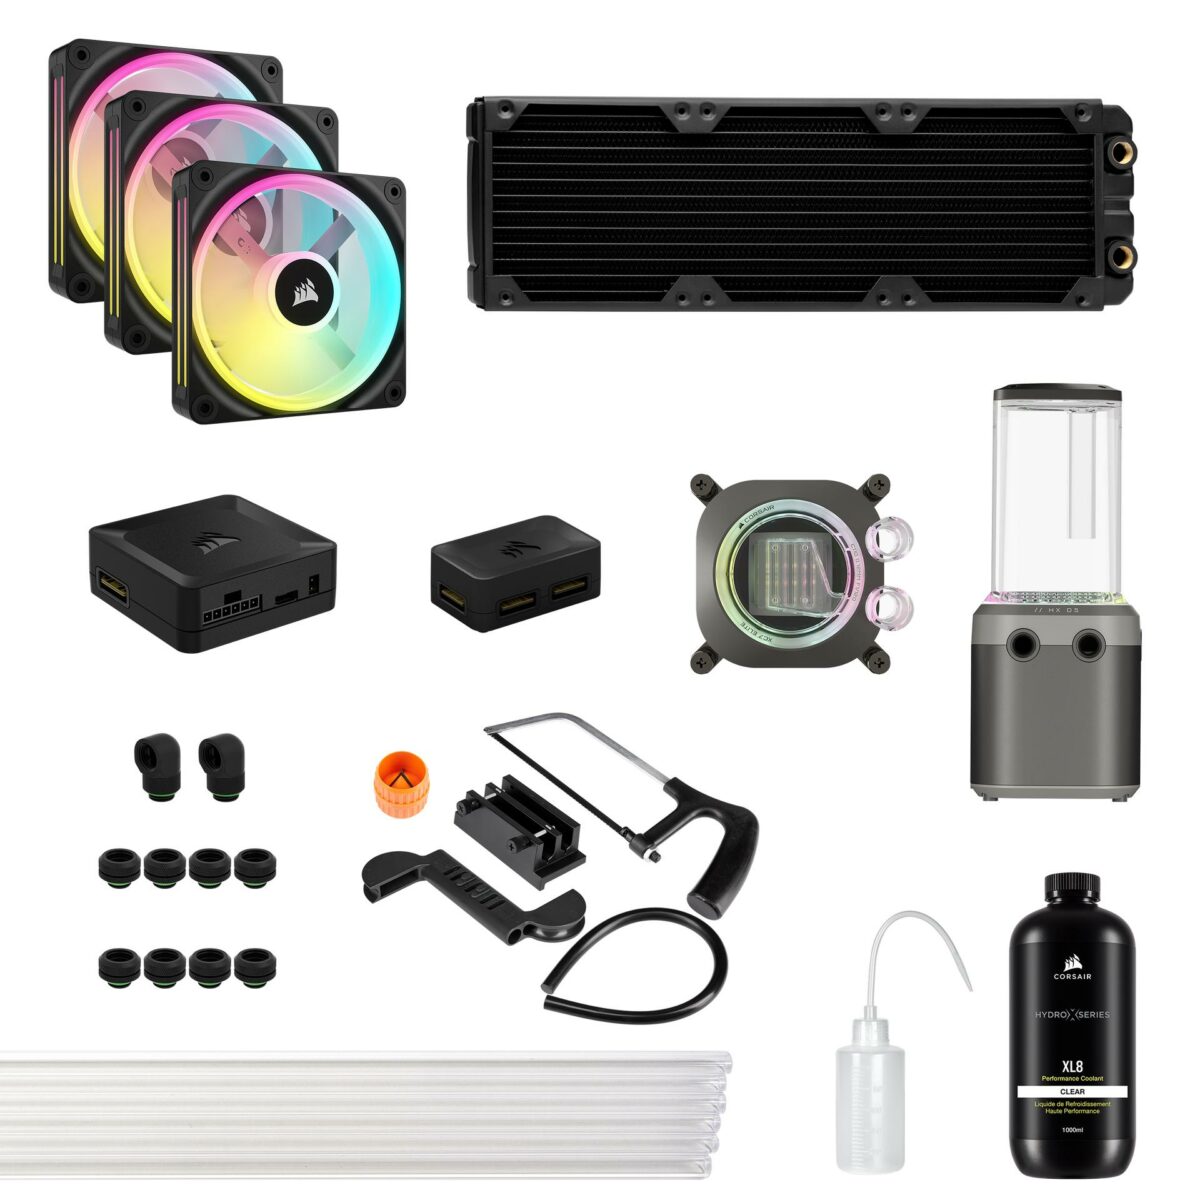 Corsair Hydro X Series iCUE Link XH405i RGB Custom Cooling Kit in Stealth Gray.